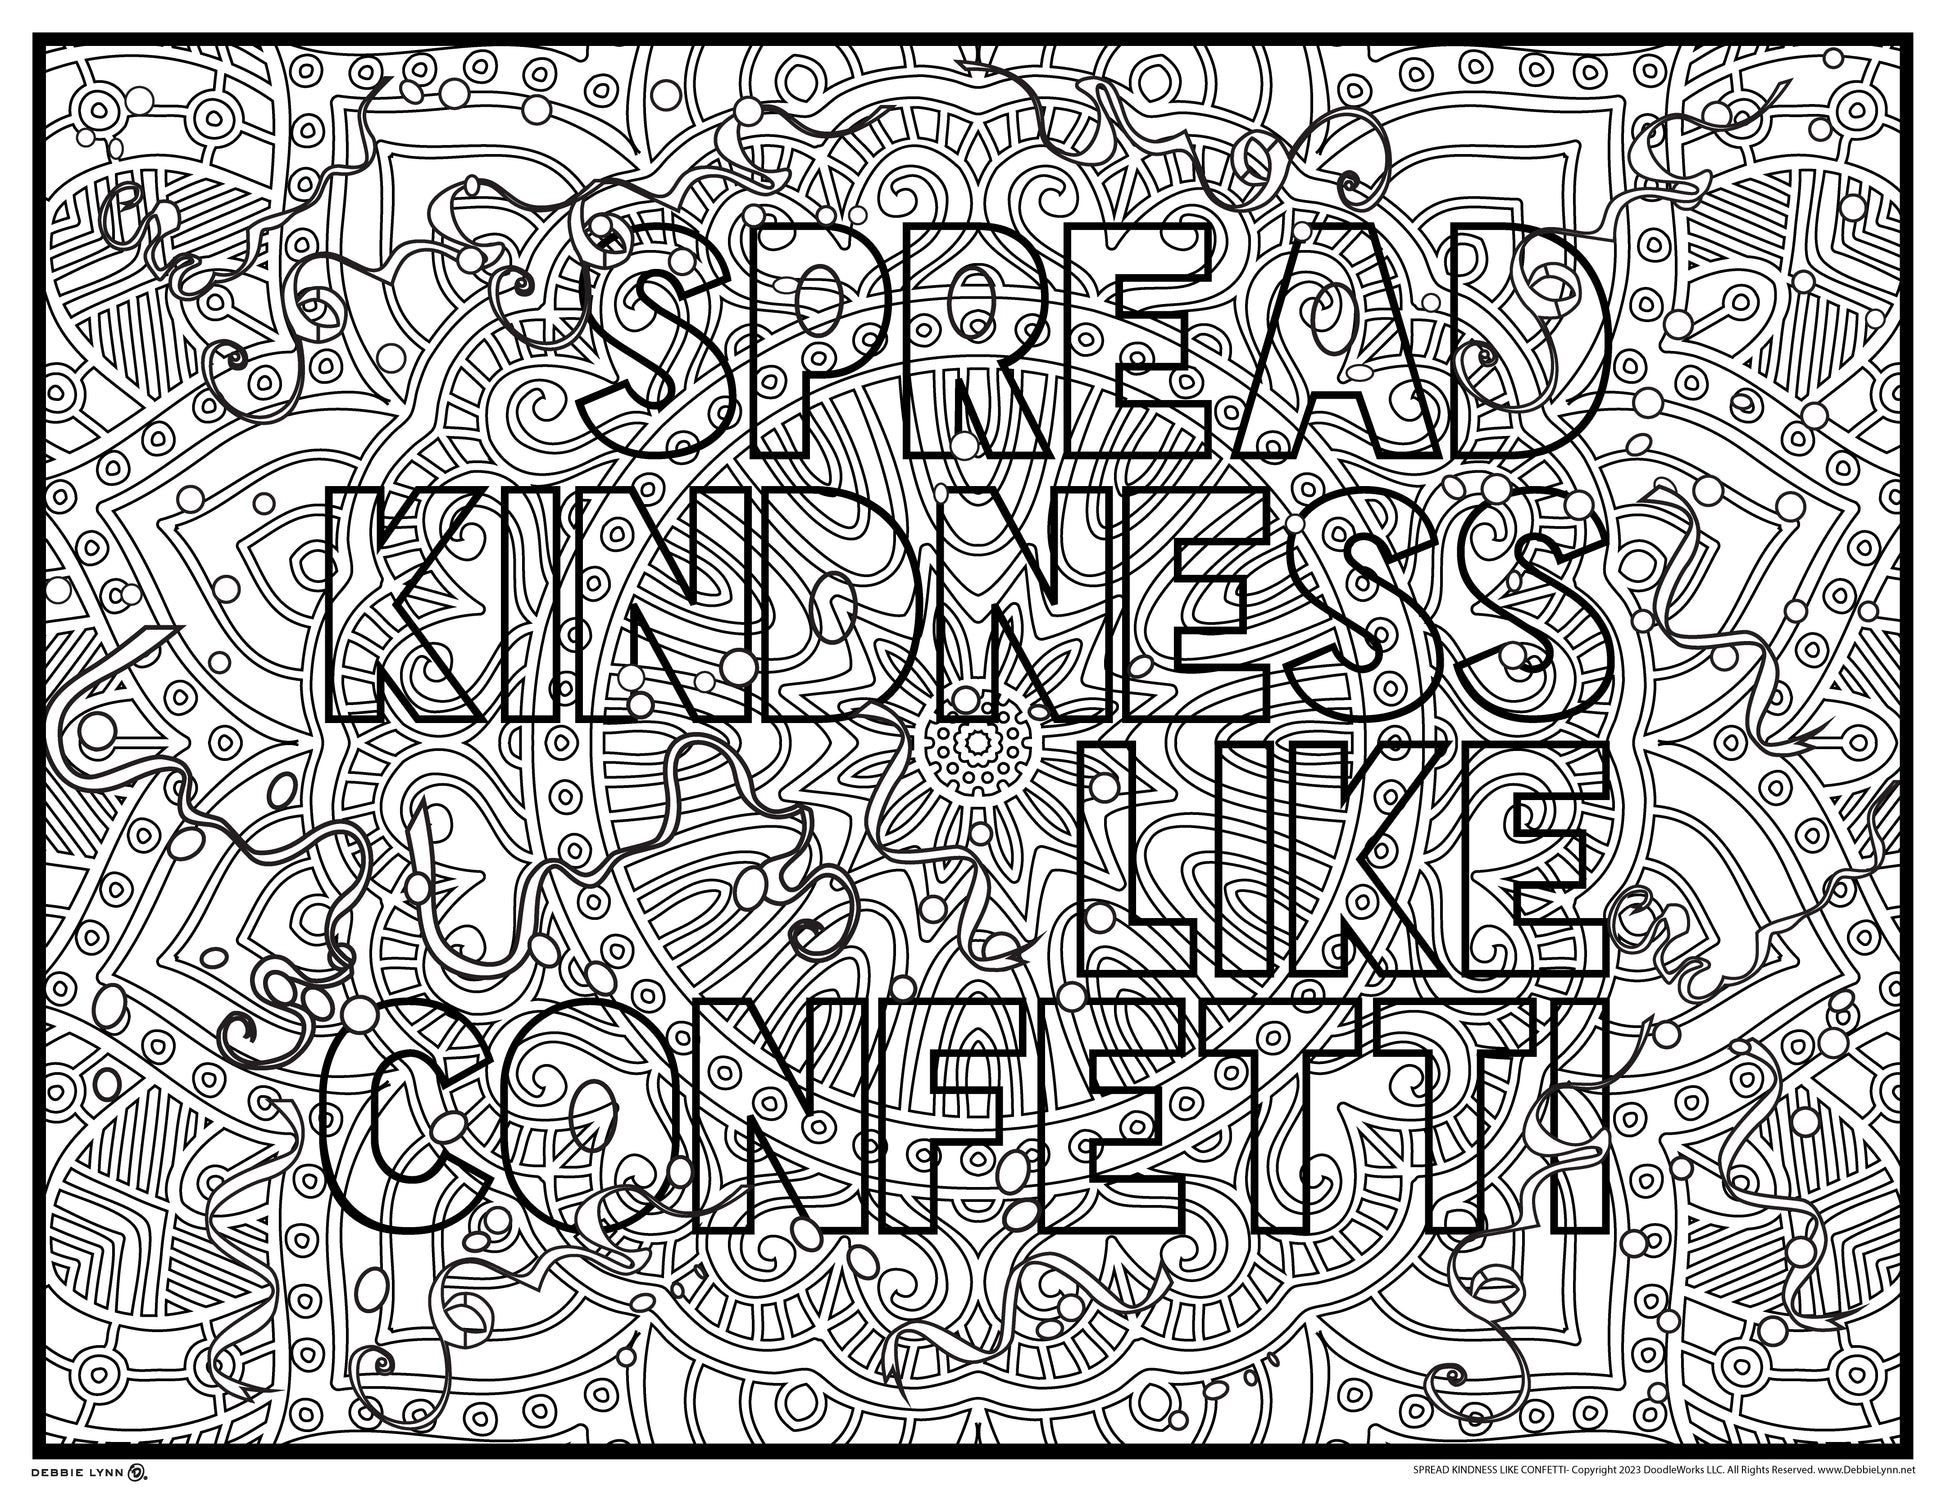 WELCOME Giant Coloring Poster Inspirational Wall Art Huge Poster for Kids,  Adults, Schools, Group Activities, Retirement Homes 